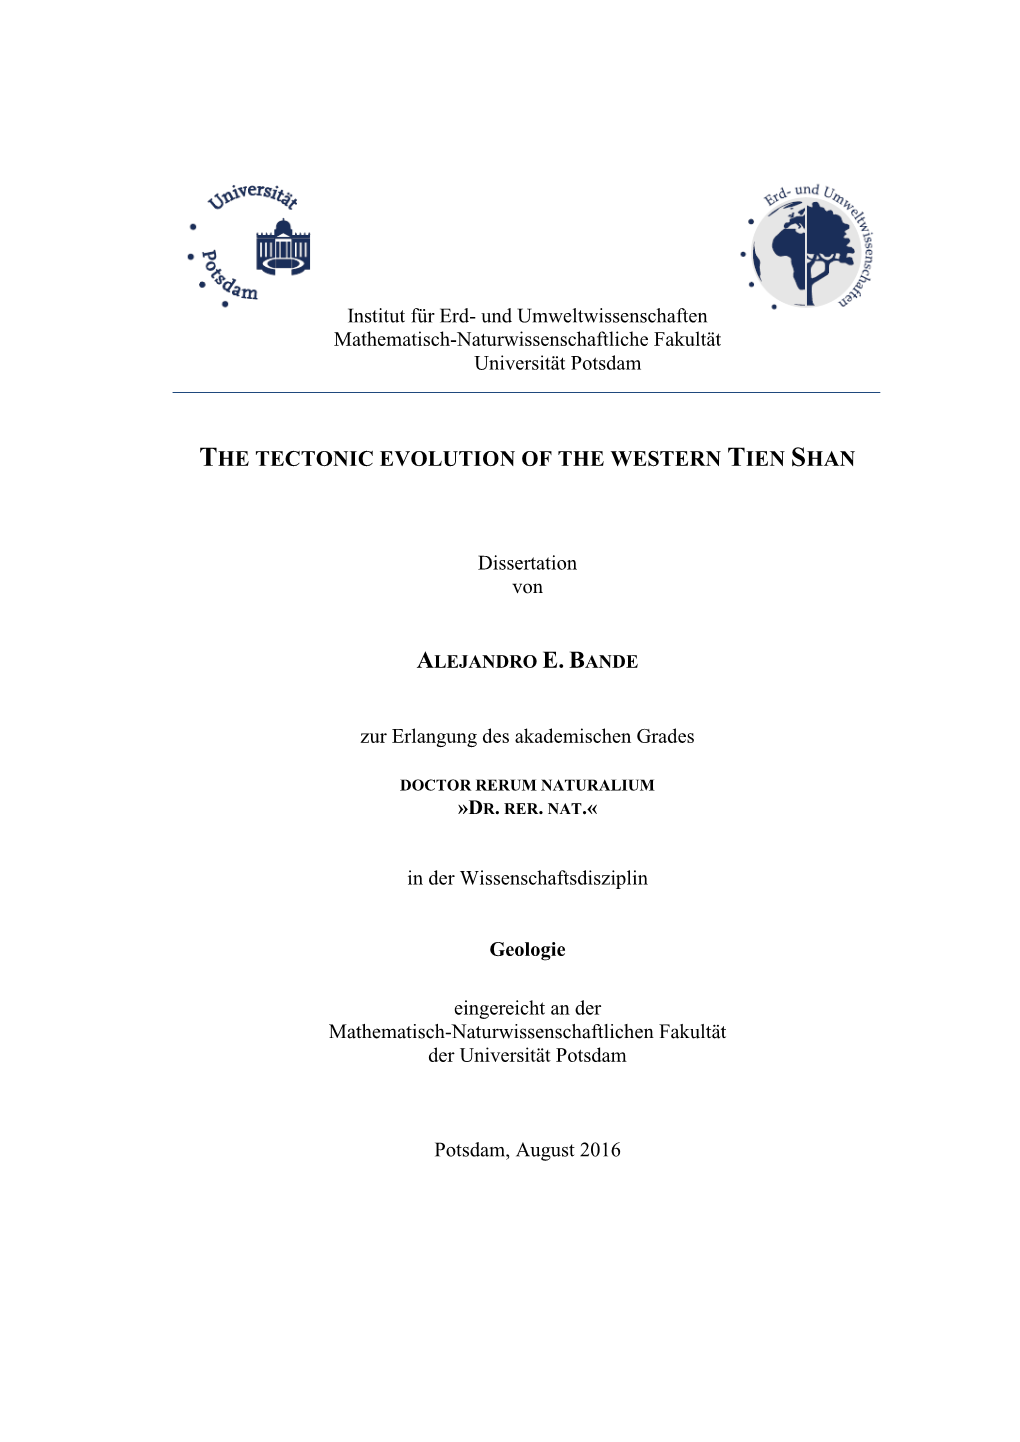 The Tectonic Evolution of the Western Tien Shan